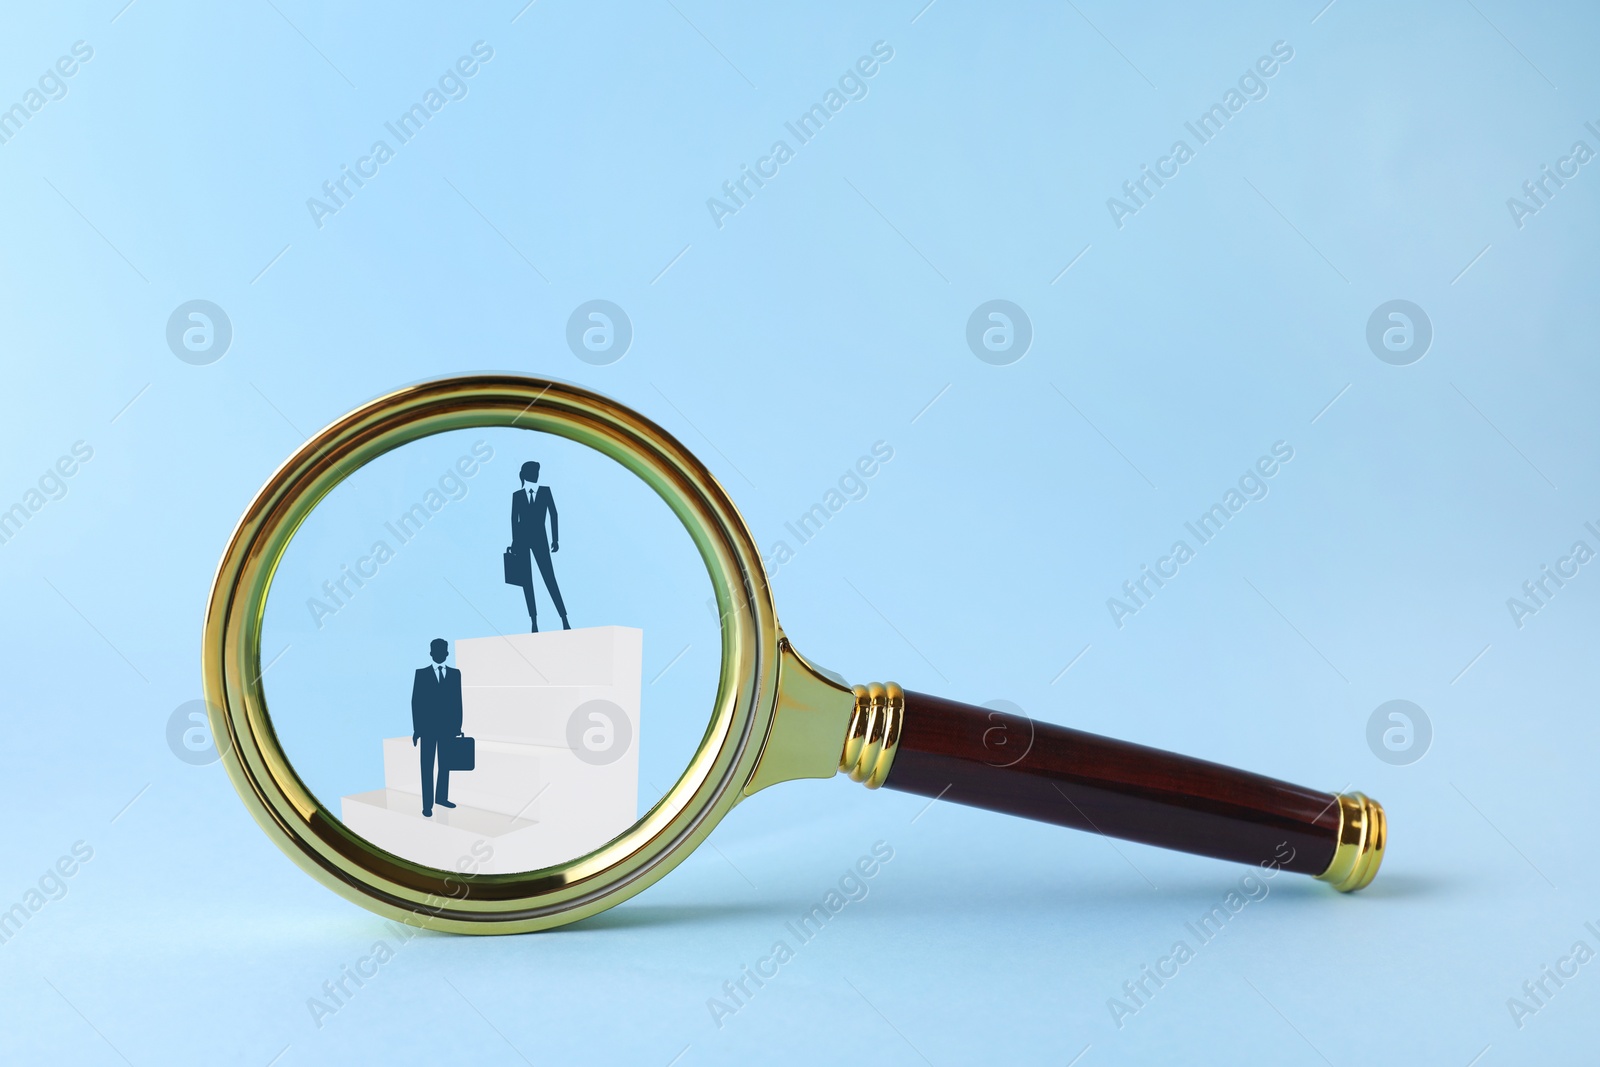 Image of Illustration of businesspeople on steps on light blue background, view through magnifier